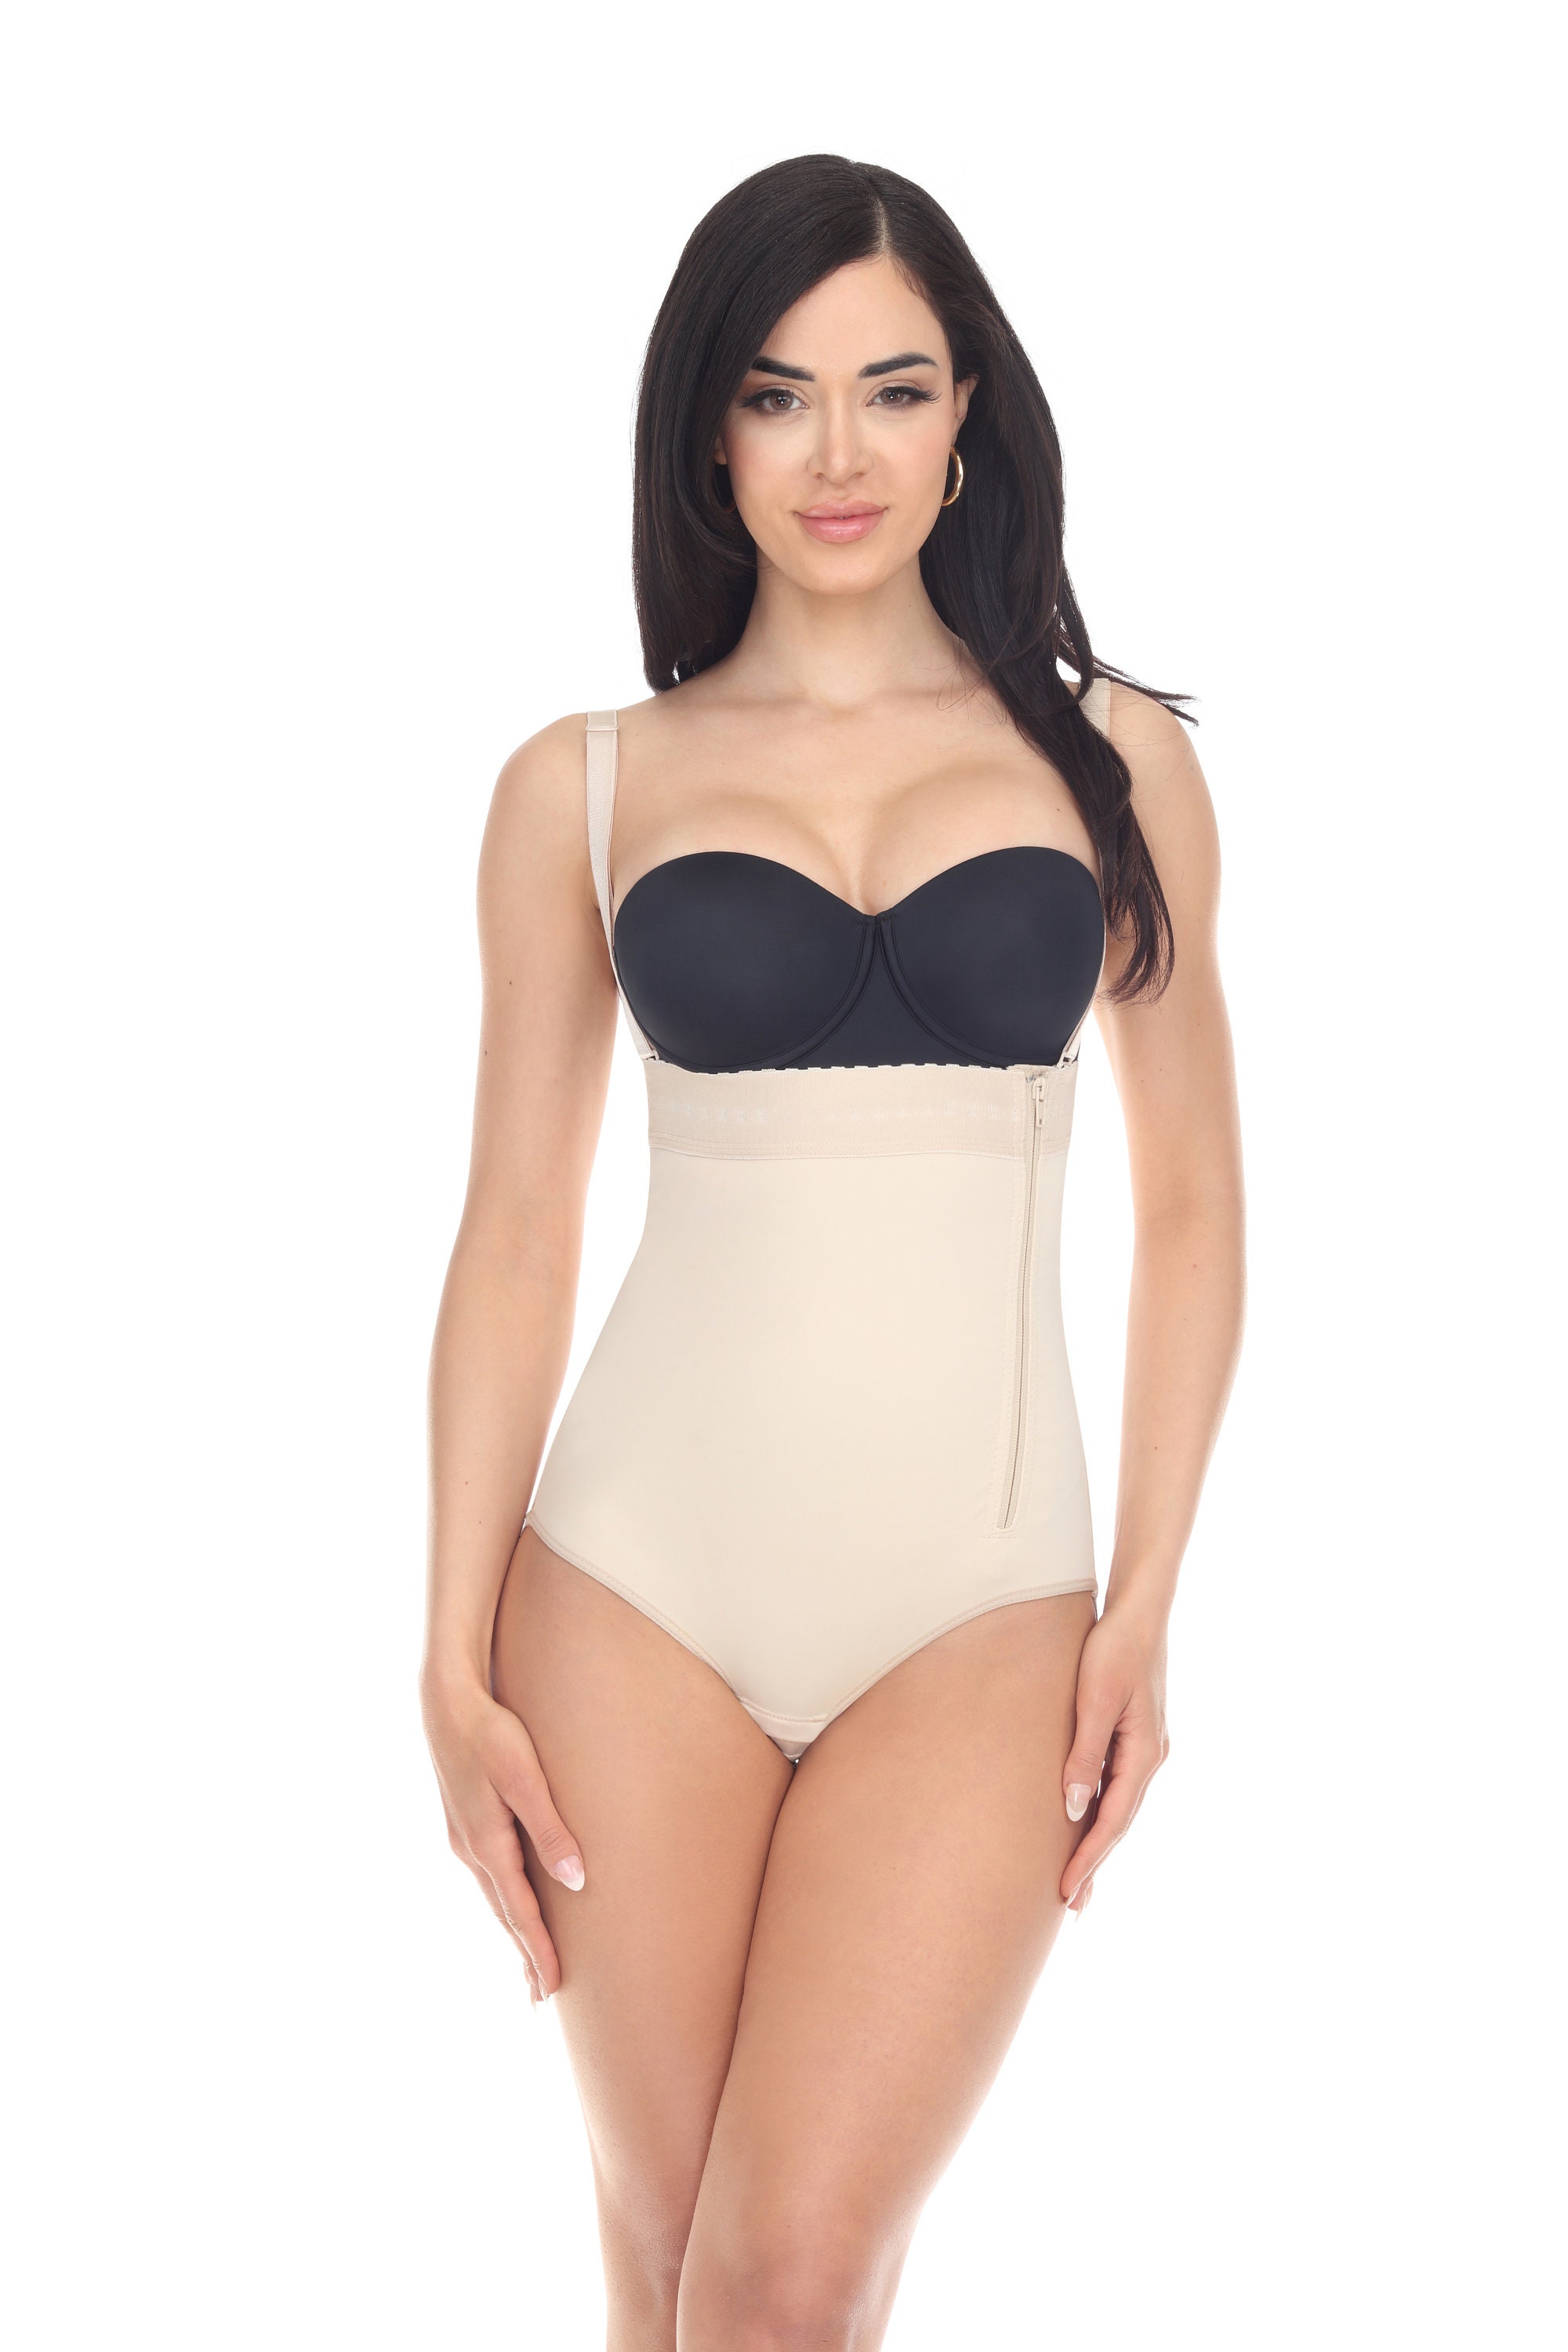 Perfect Curves Start Here: Best-Selling High-Quality Shapewear!#curlad